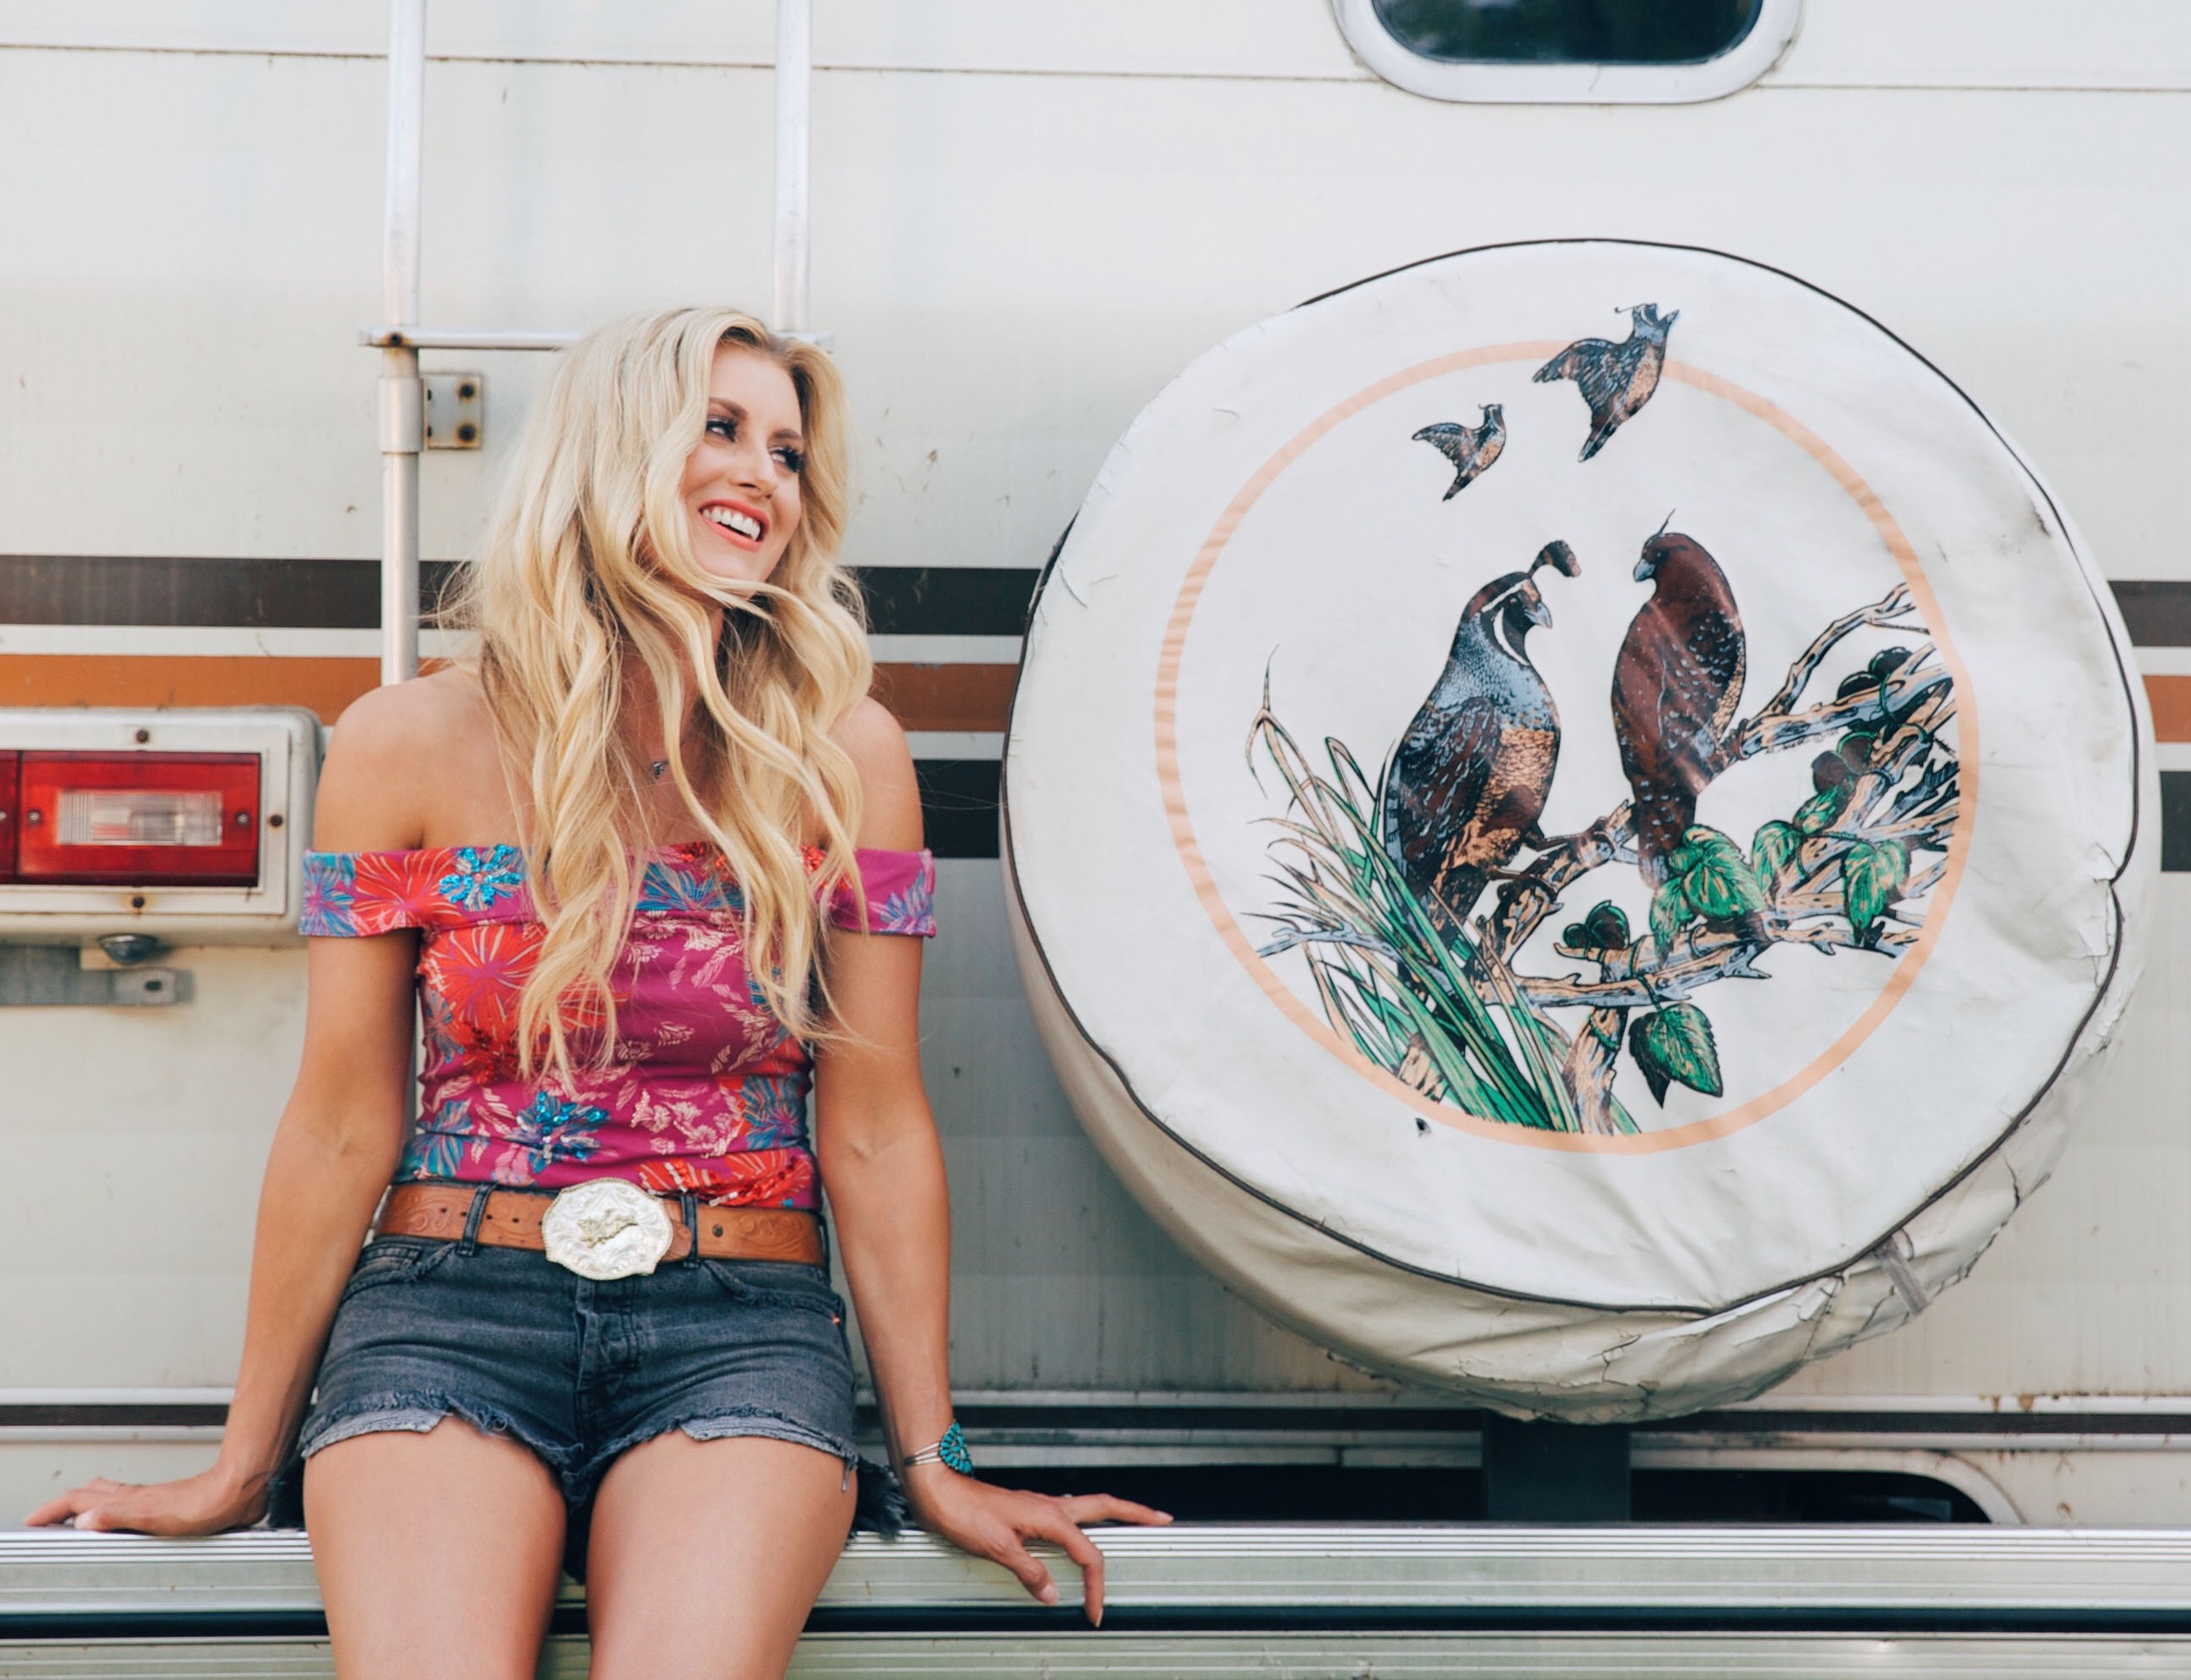 Stephanie Quayle Dishes on Filming “Winnebago” Music Video – Exclusive!